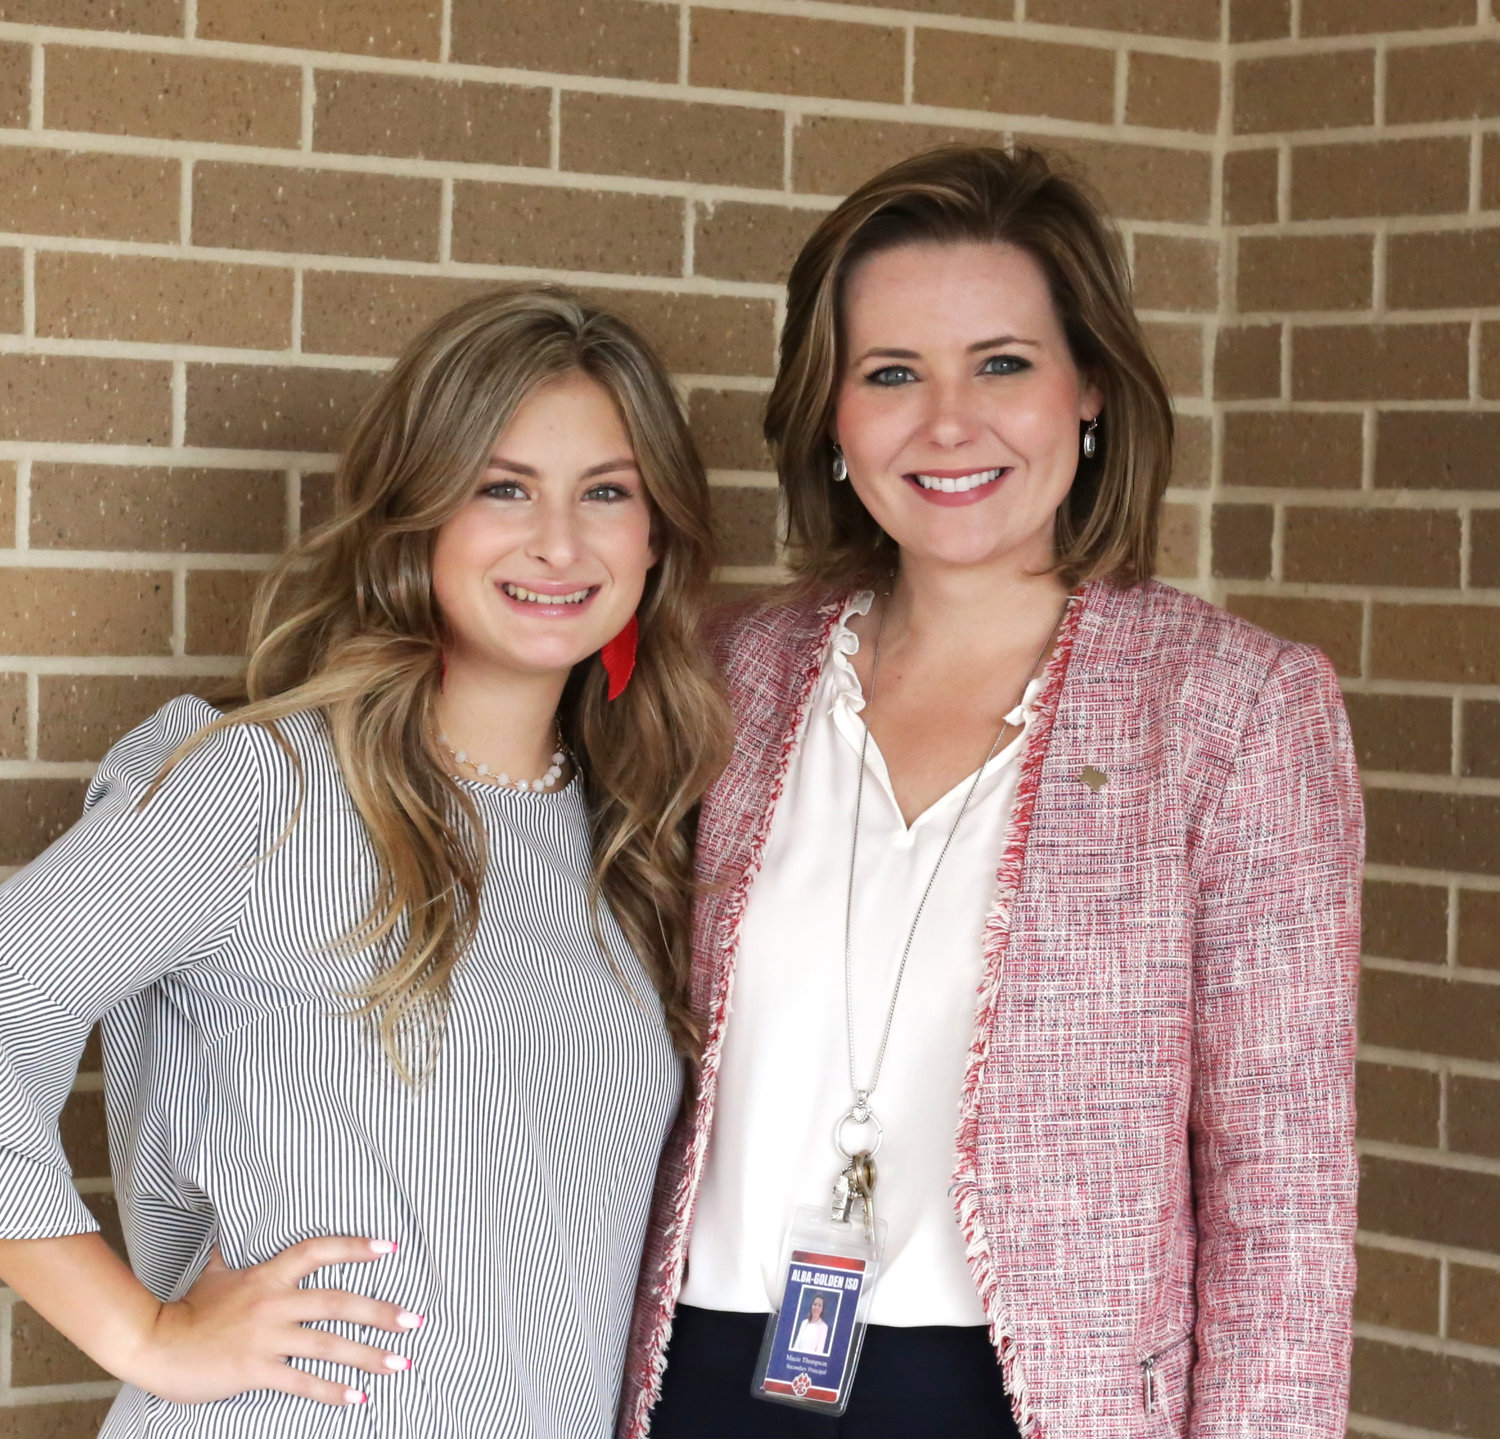 Alba-Golden secondary school student of the month senior Cassidy Burris is photographed with high school principal Macie Thompson.